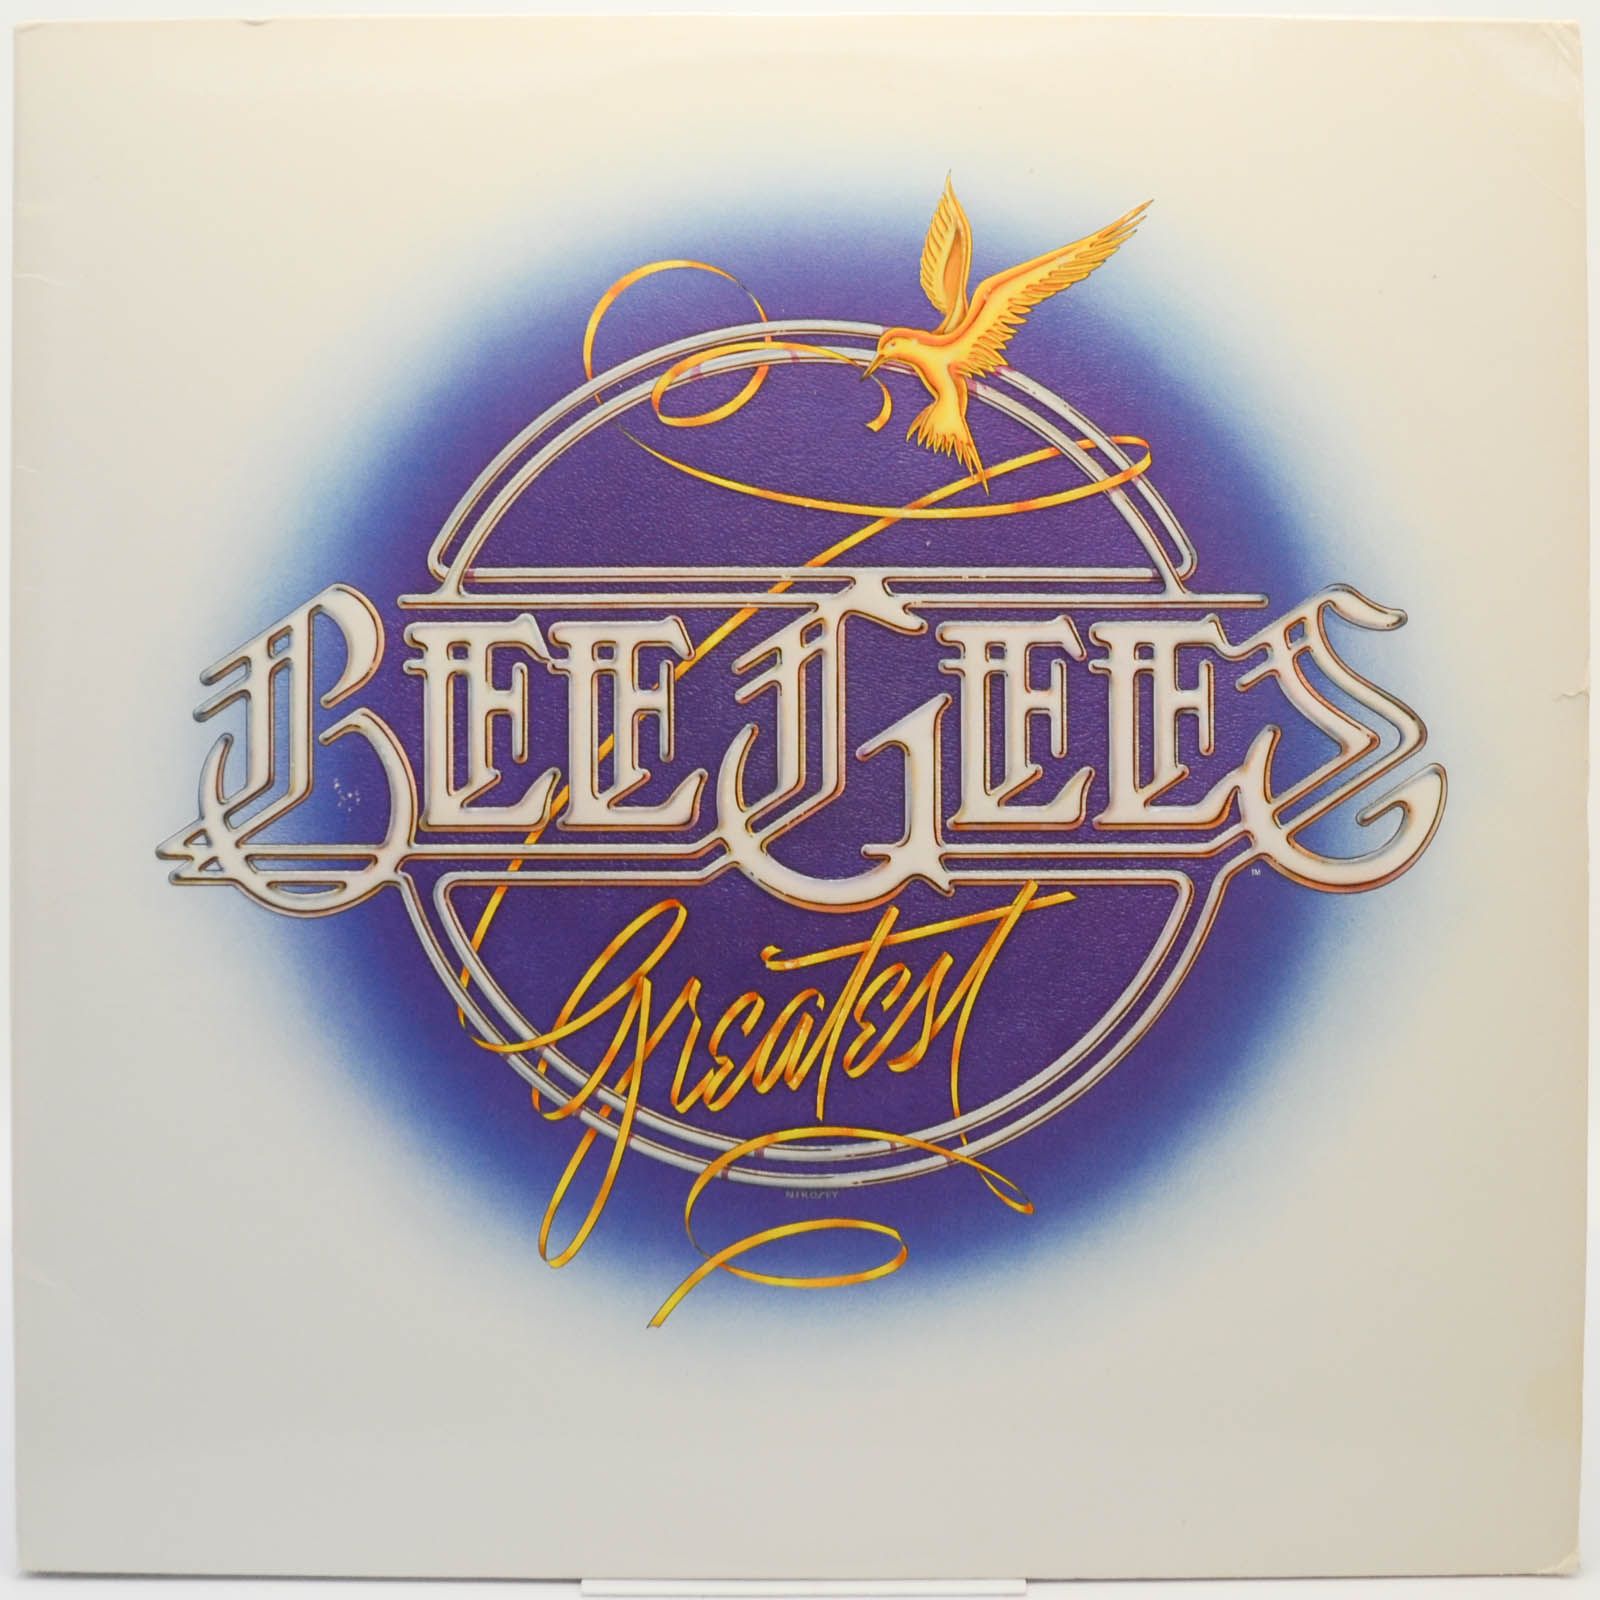 Bee Gees - Bee Gees Greatest (USA, 2LP), 1979.